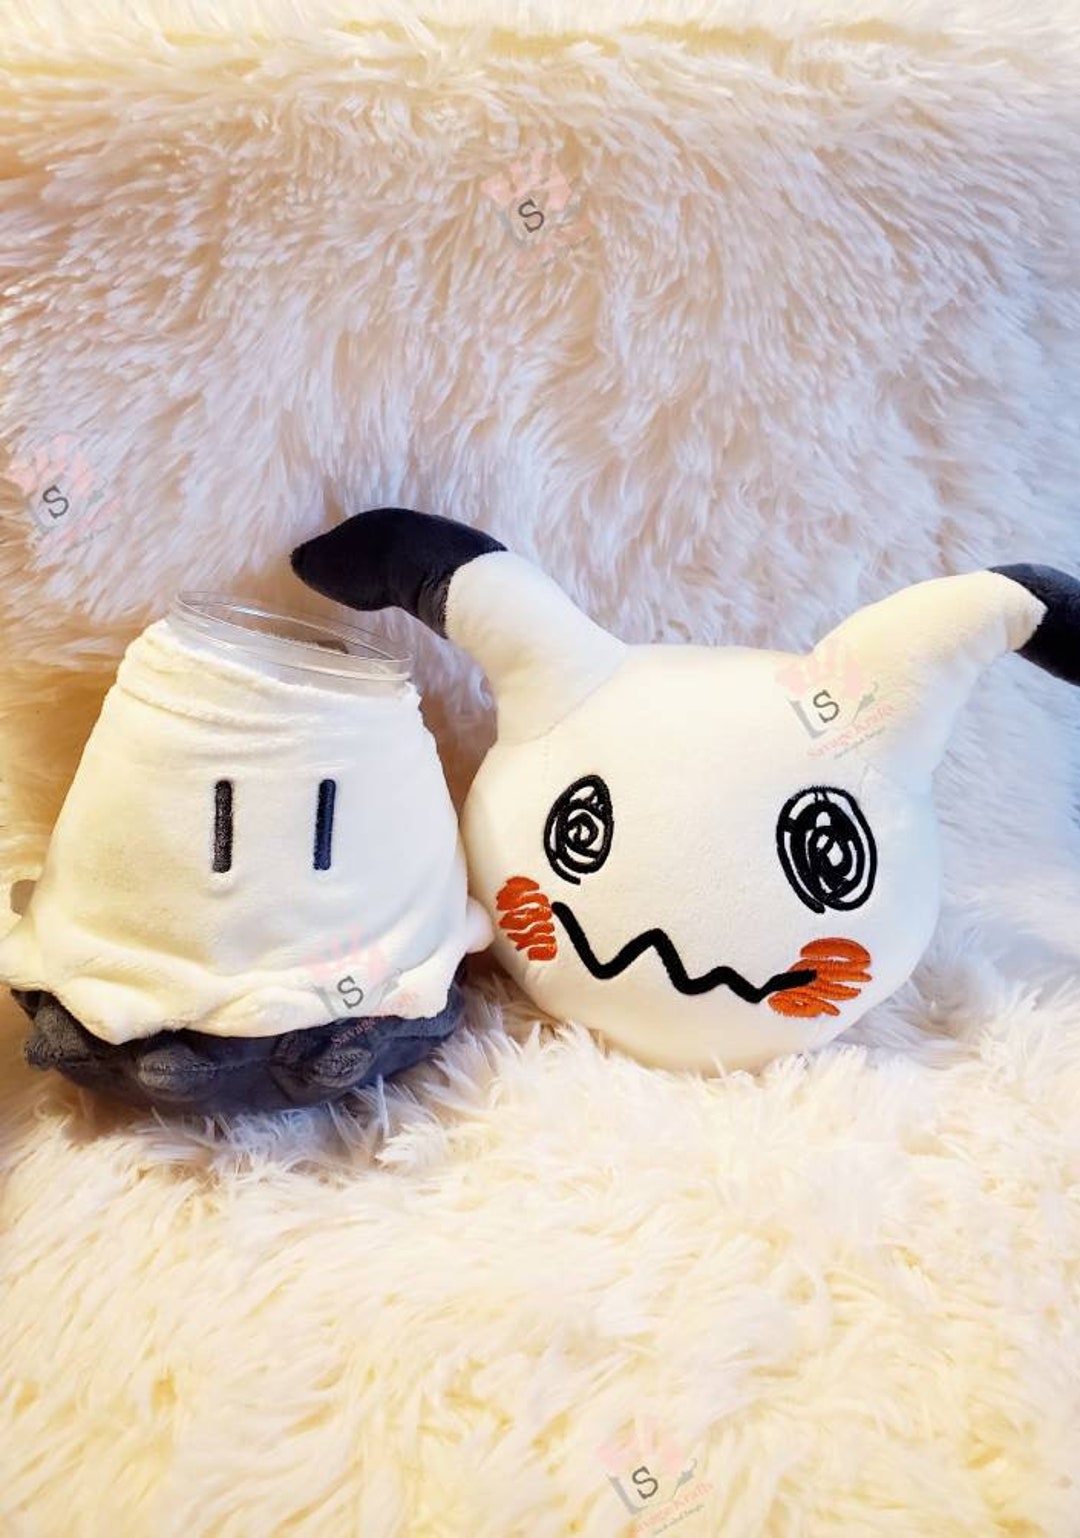 StockX Collectibles on Instagram: “Murakami Plushes